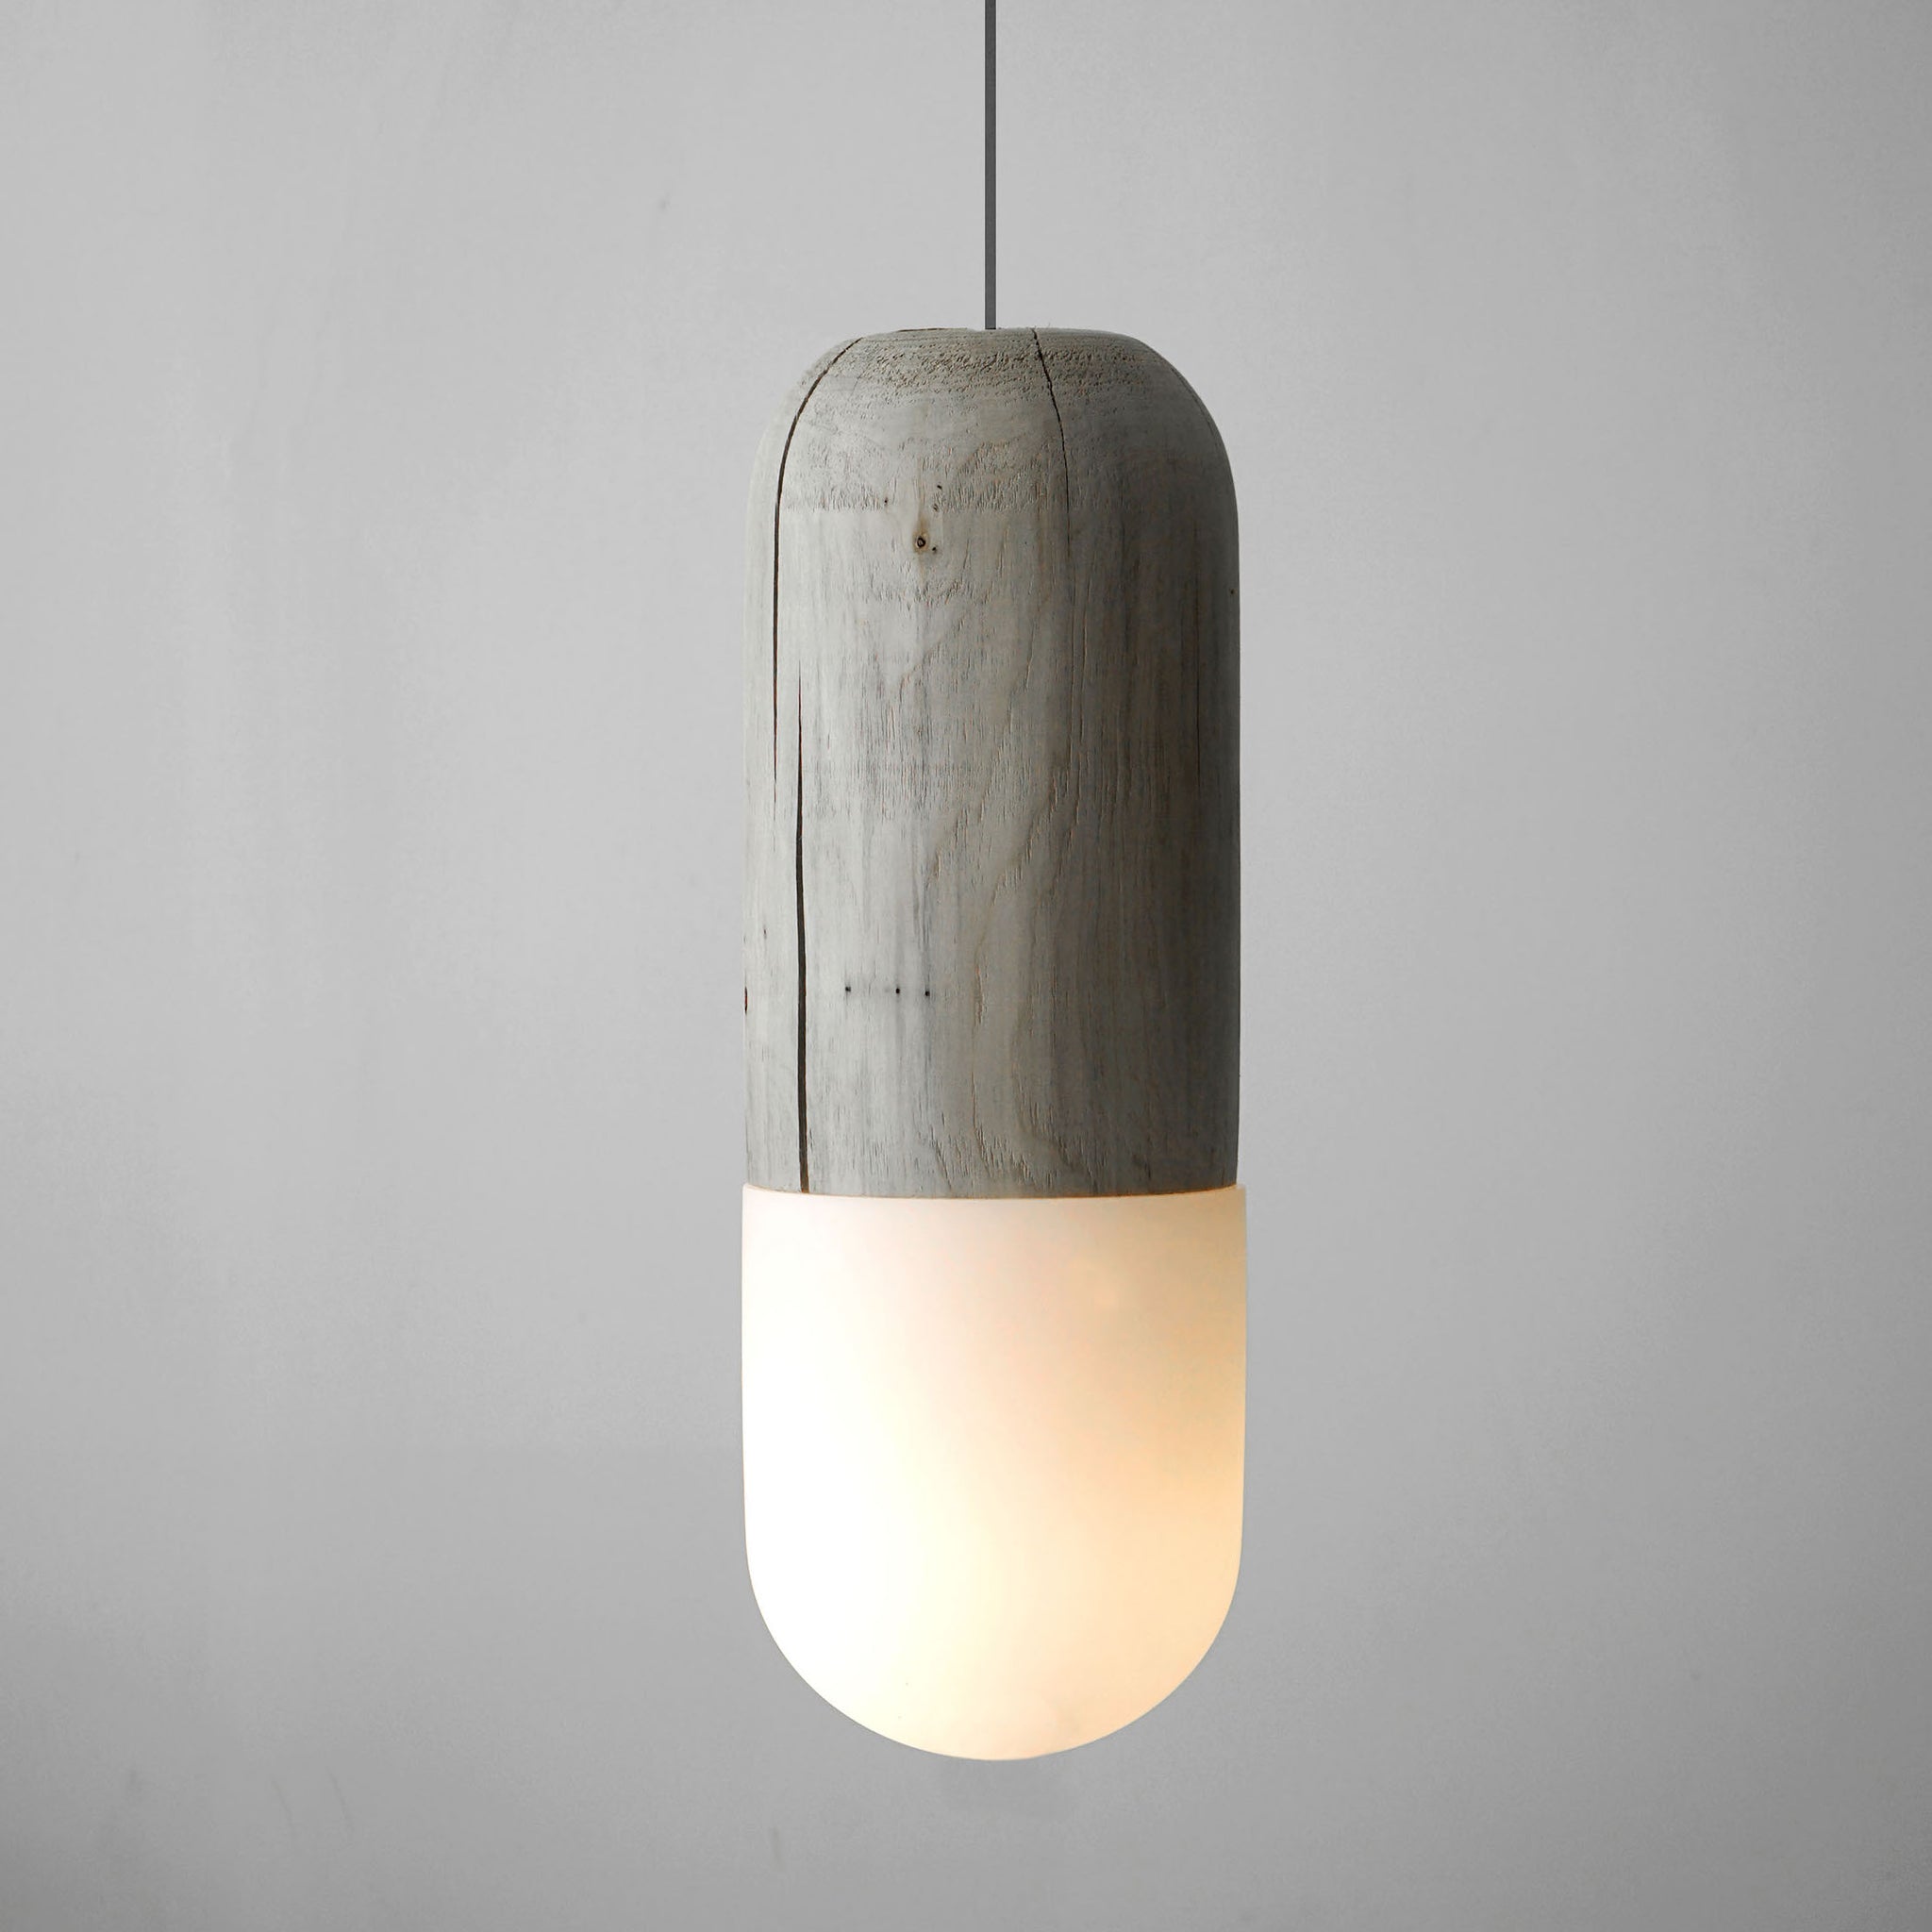 Pendant light made from cedar and handblown glass coming together to form a pill shape